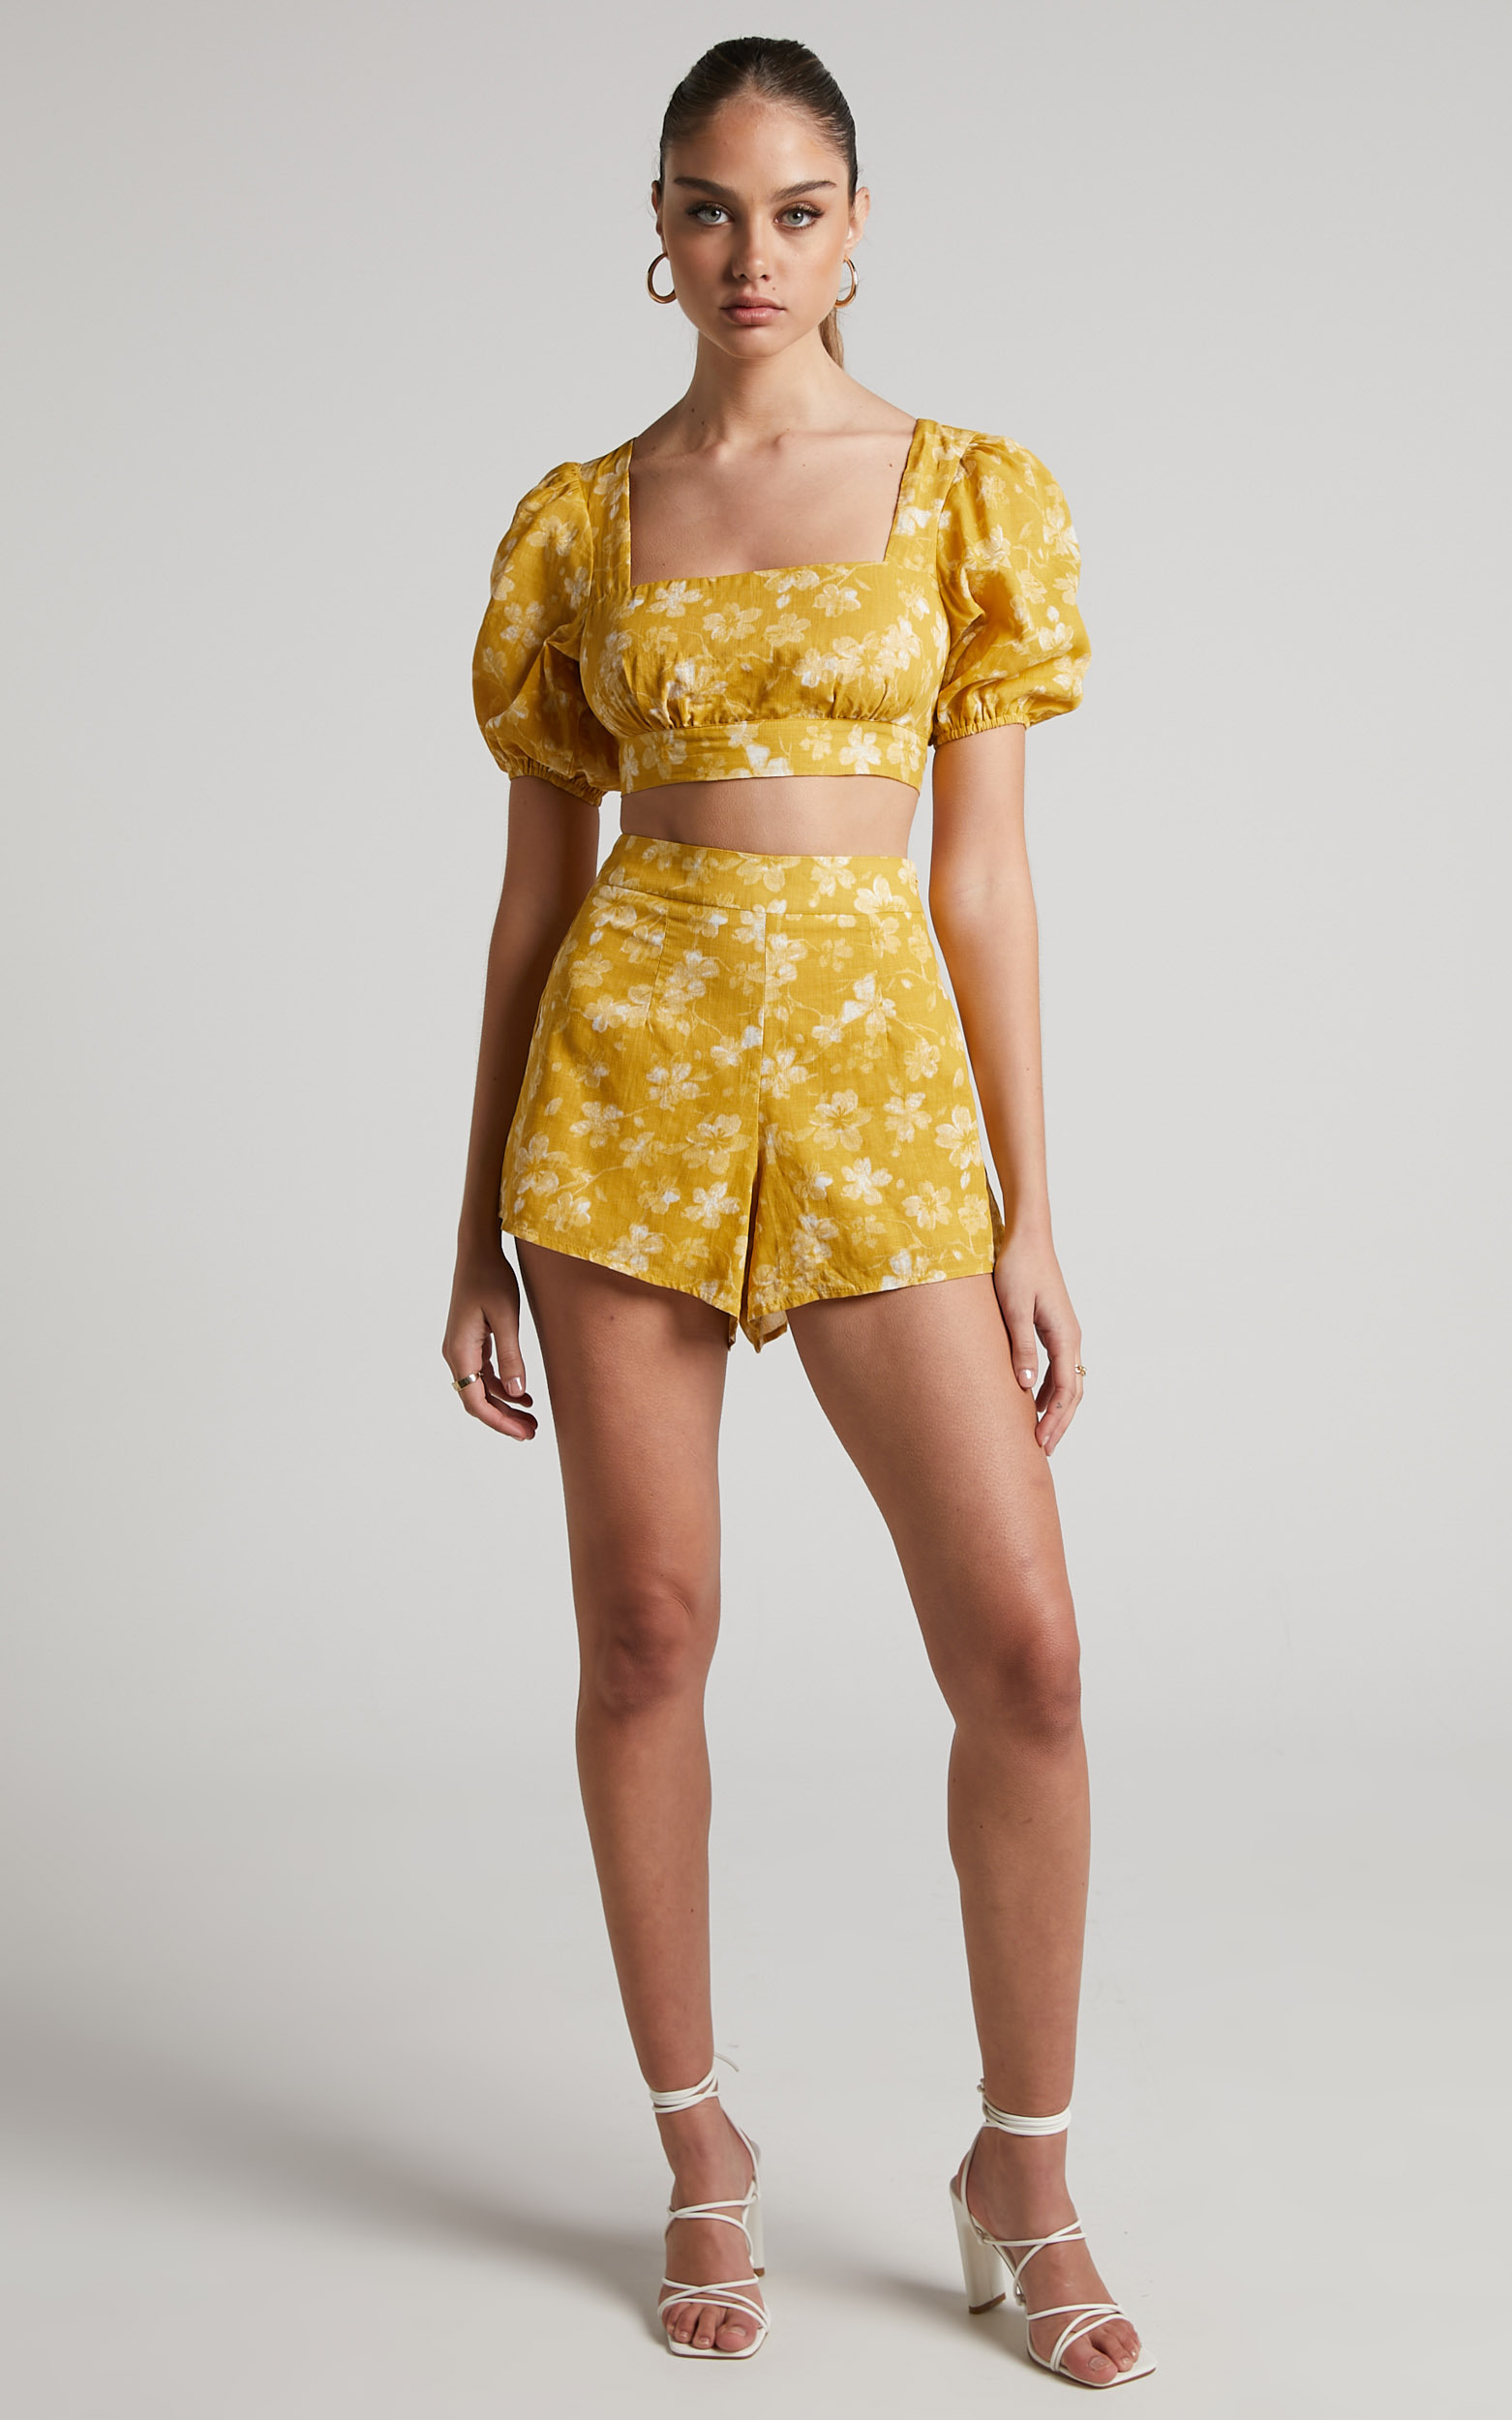 Zilda Open Back Puff Sleeve Crop Top and High Waist Shorts Two Piece Set in Yellow - 04, YEL1, hi-res image number null